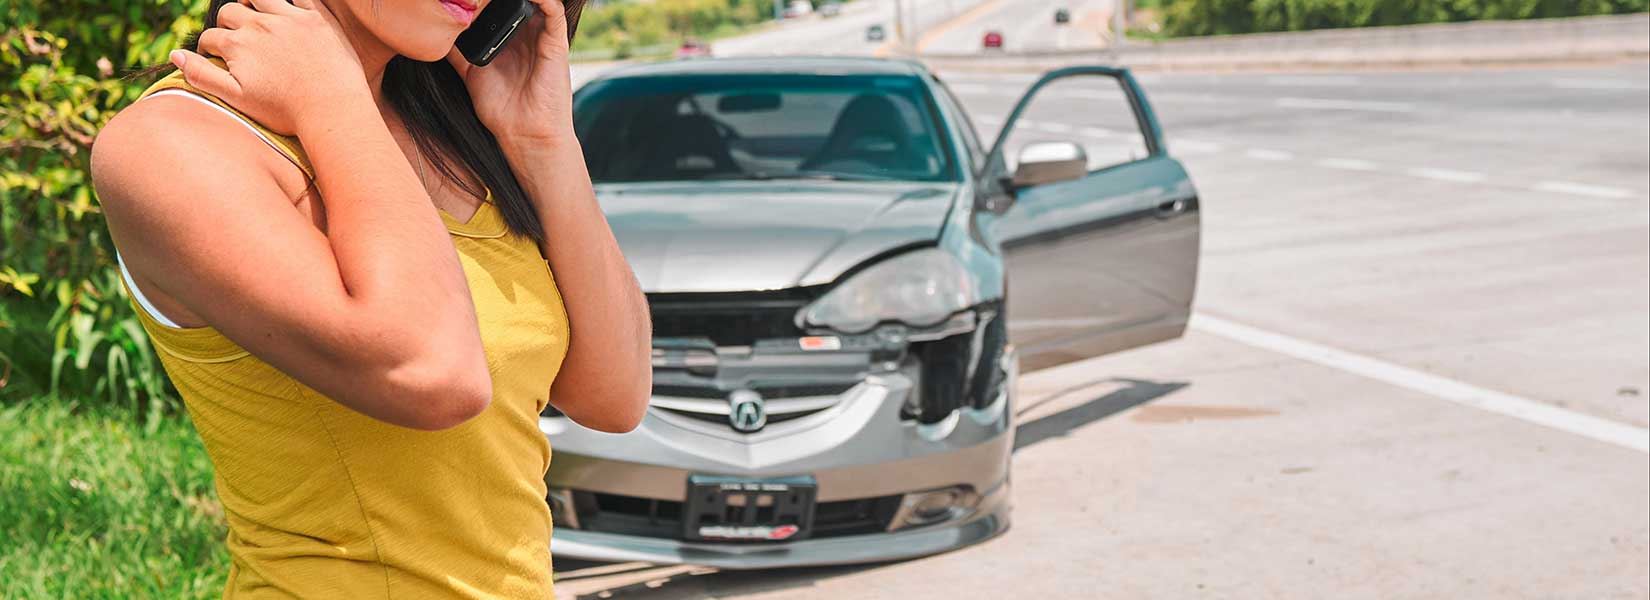 A woman on the phone after a car accident